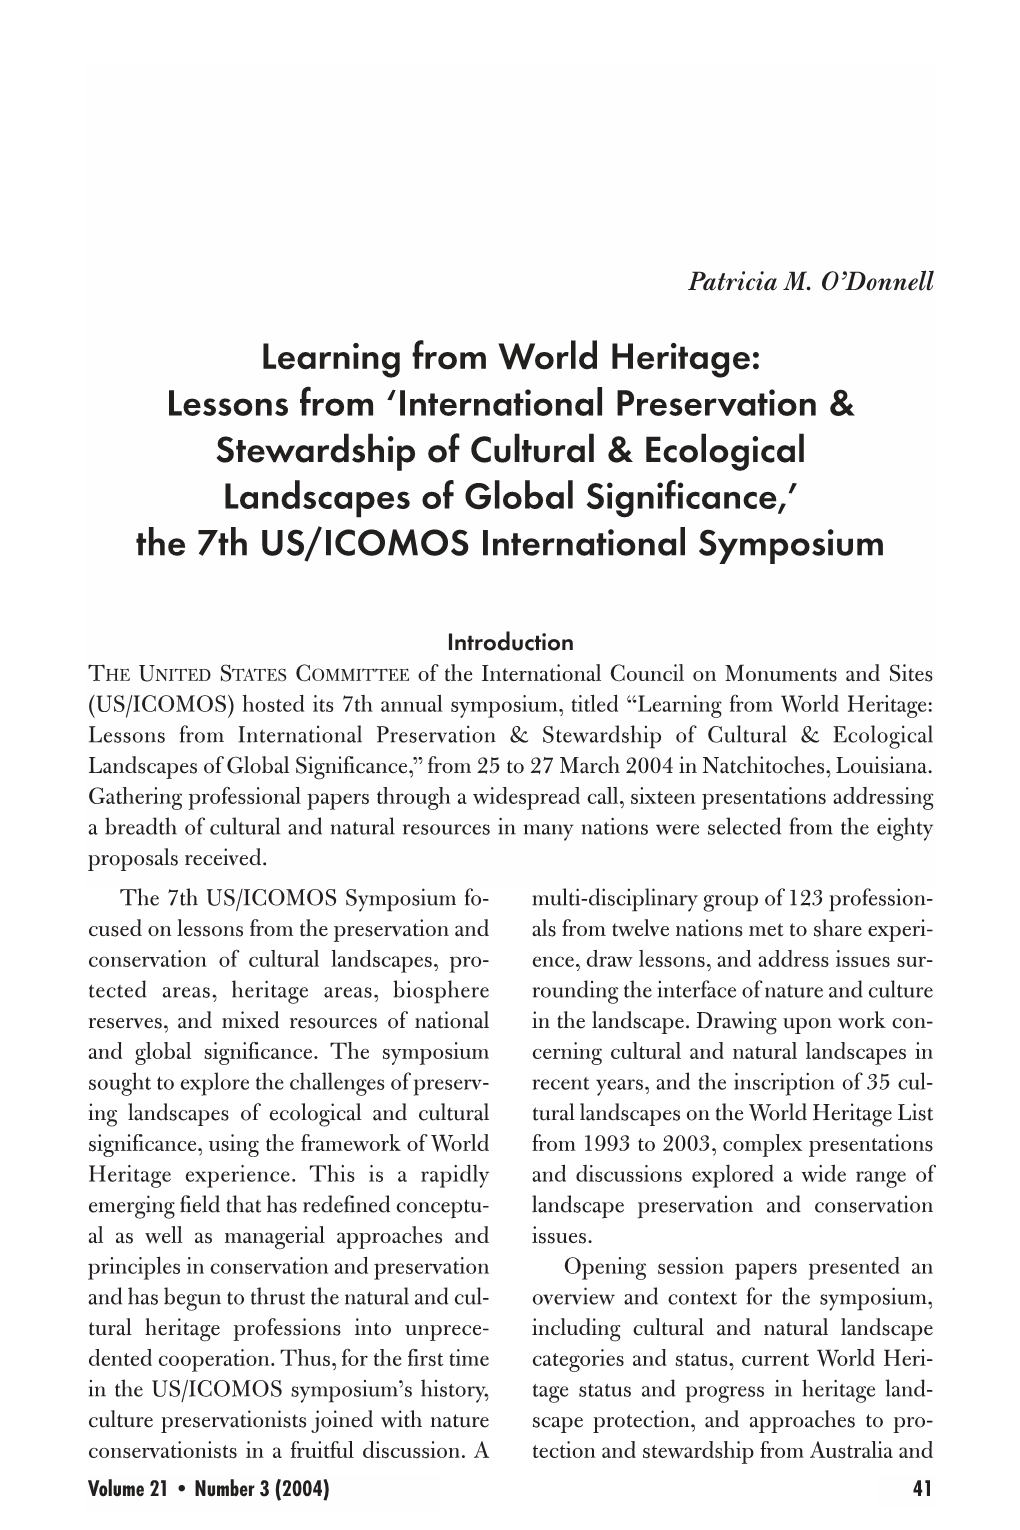 Learning from World Heritage: Lessons from 'International